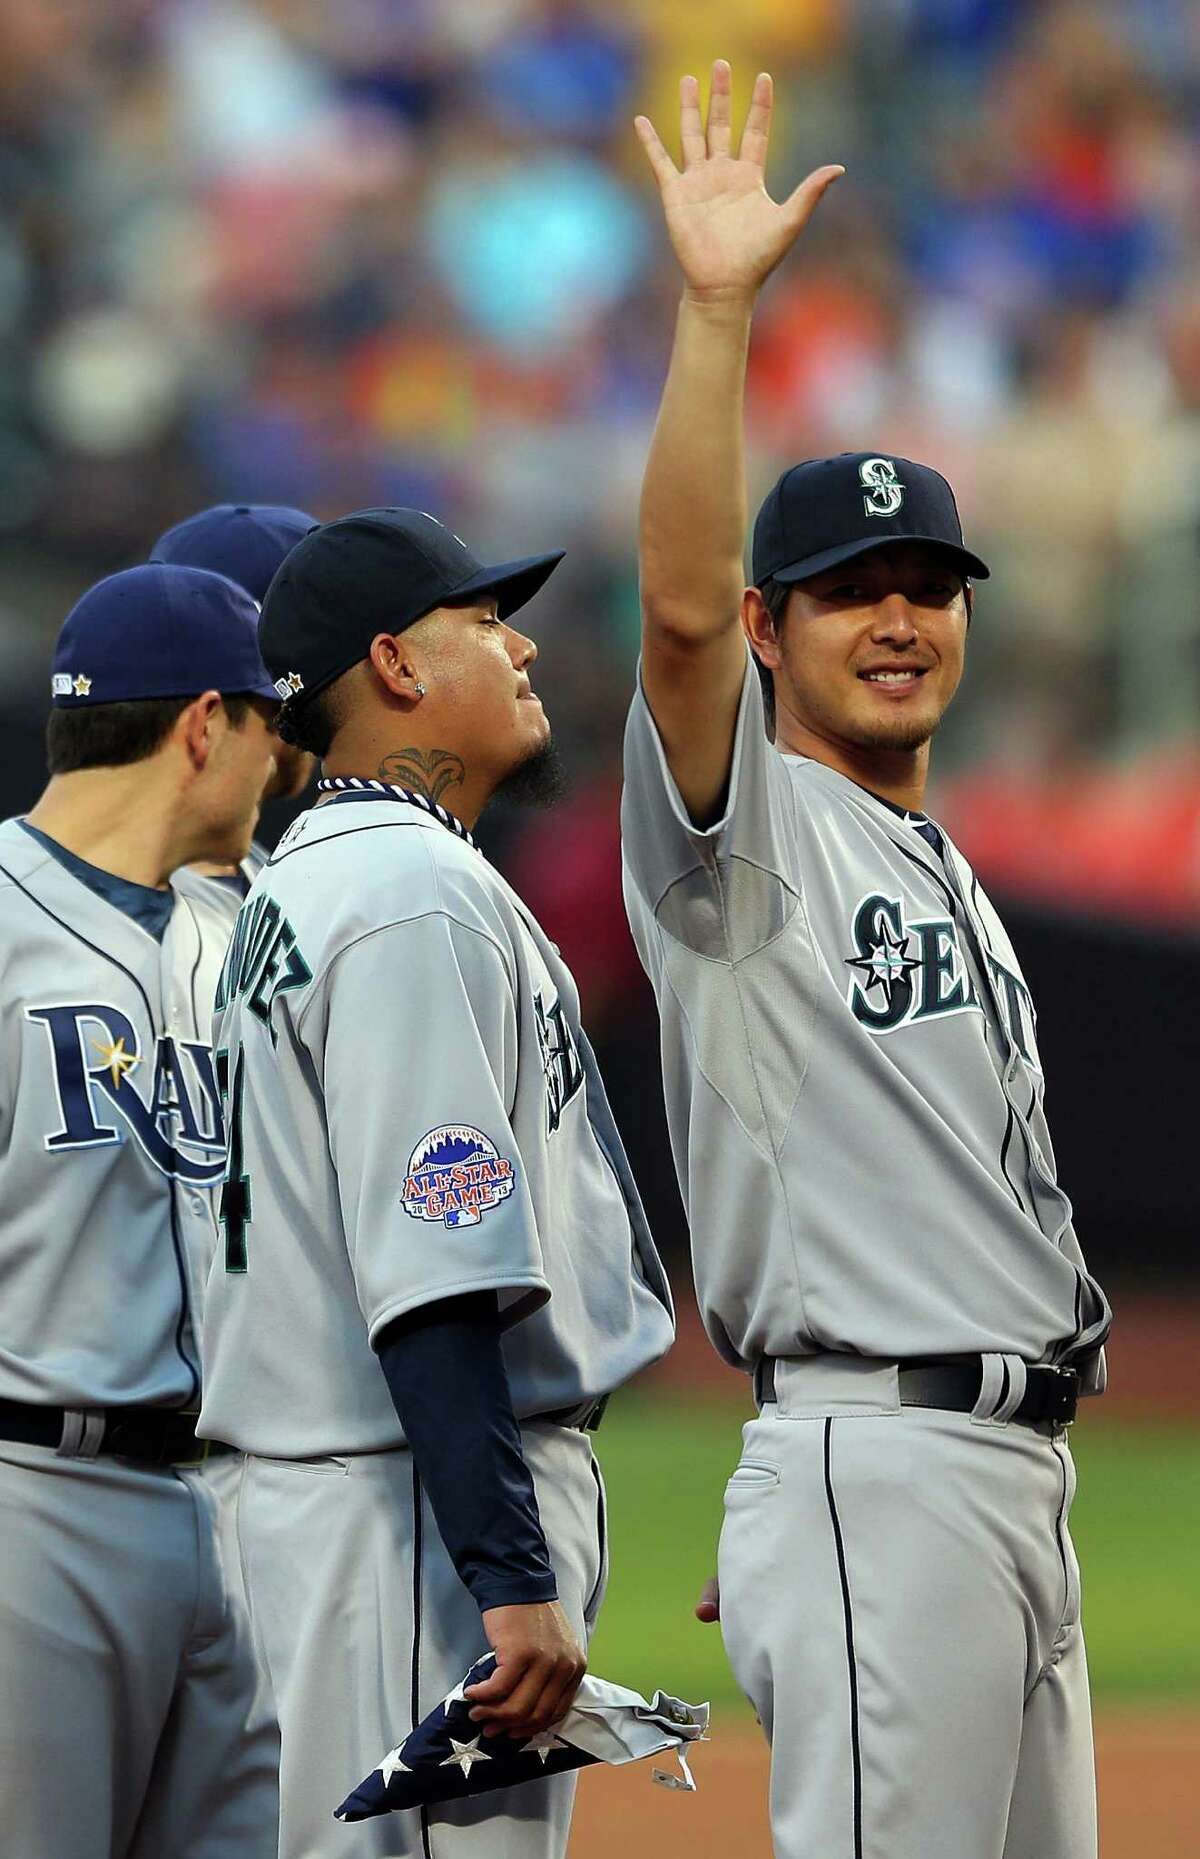 Mariners at the 2013 All-Star Game